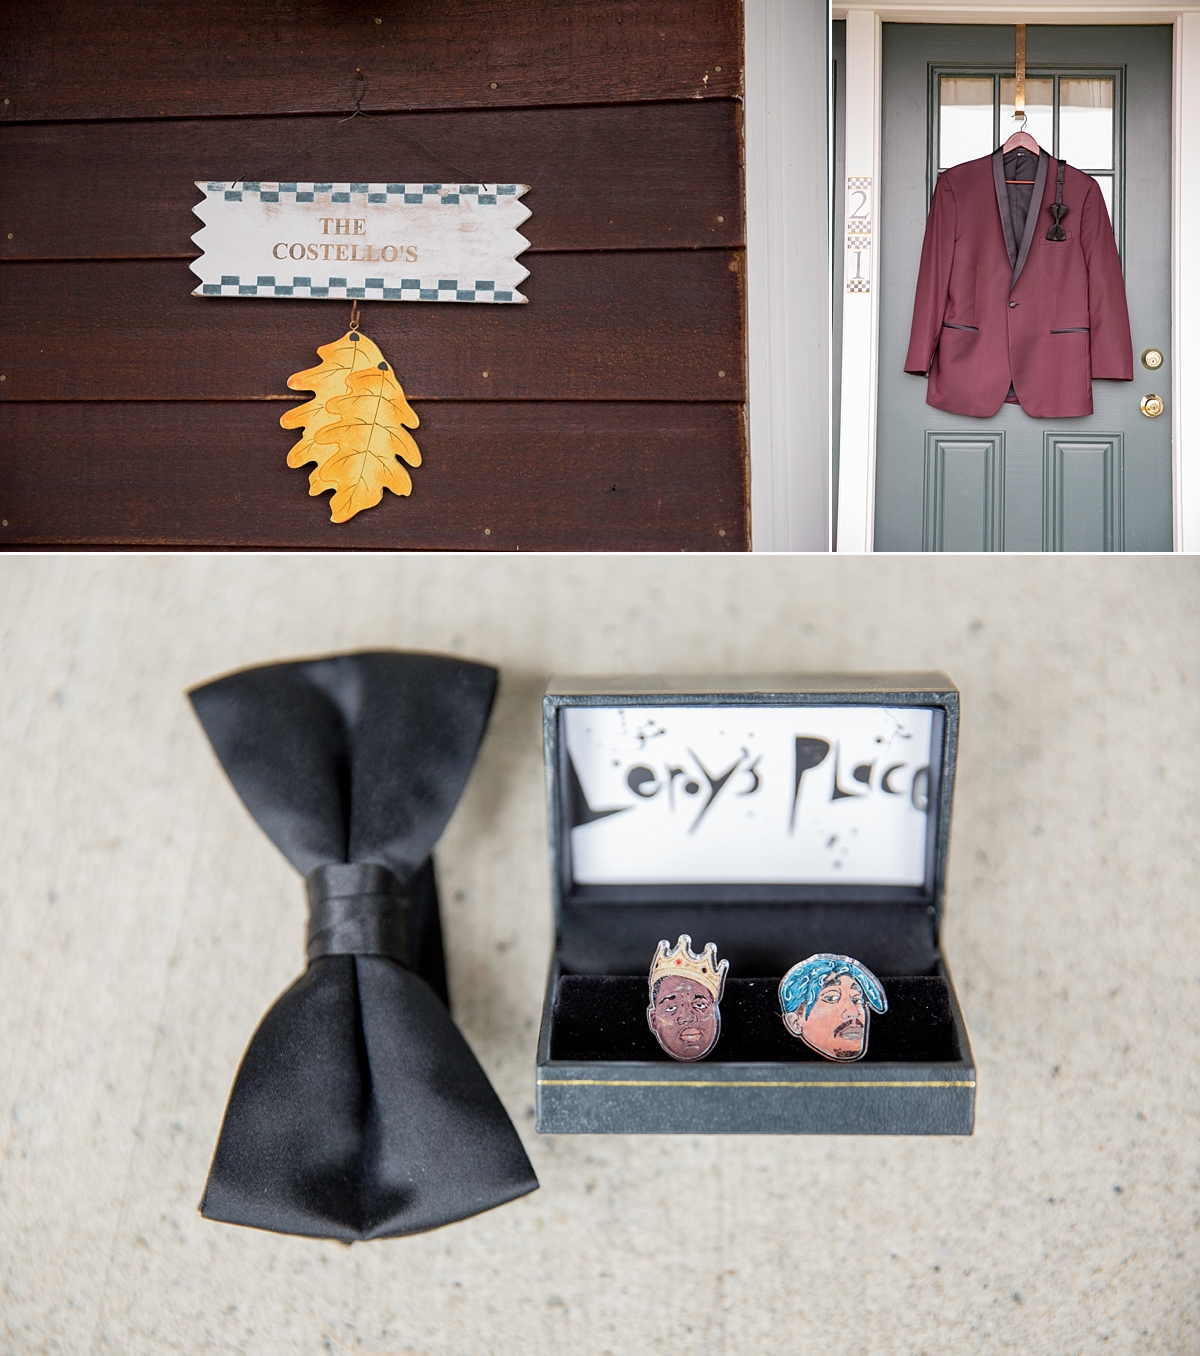 leroy's place custom cufflinks, notorious b.i.g. cufflinks, 2 Pac cufflinks, maroon suit jacket with black tie, chantelle marie lakehouse and celebration venue, sarah heppell photography